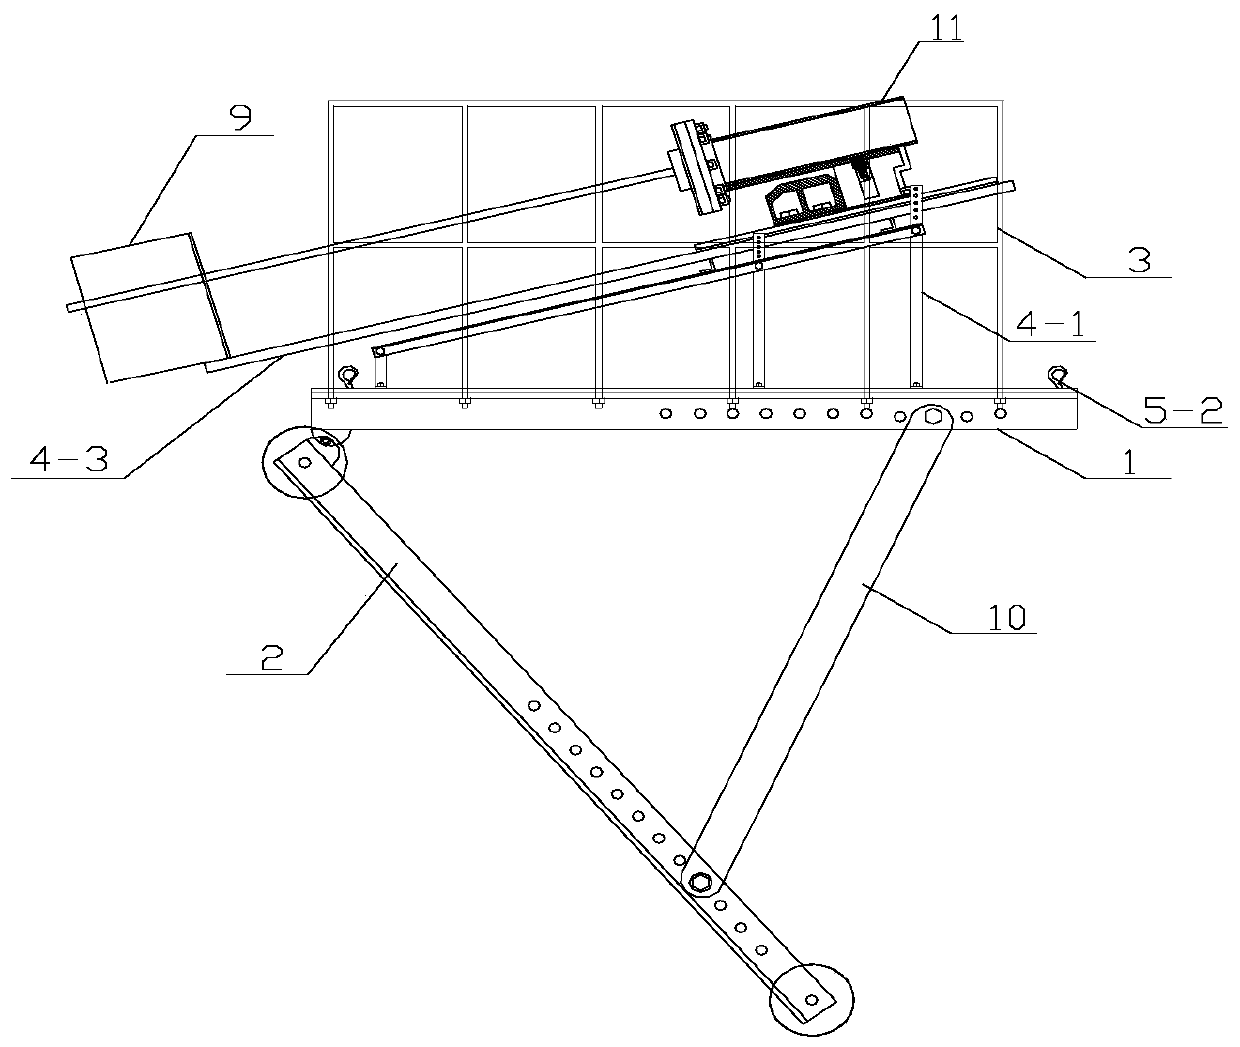 Operating platform for high slope anchor rod support construction